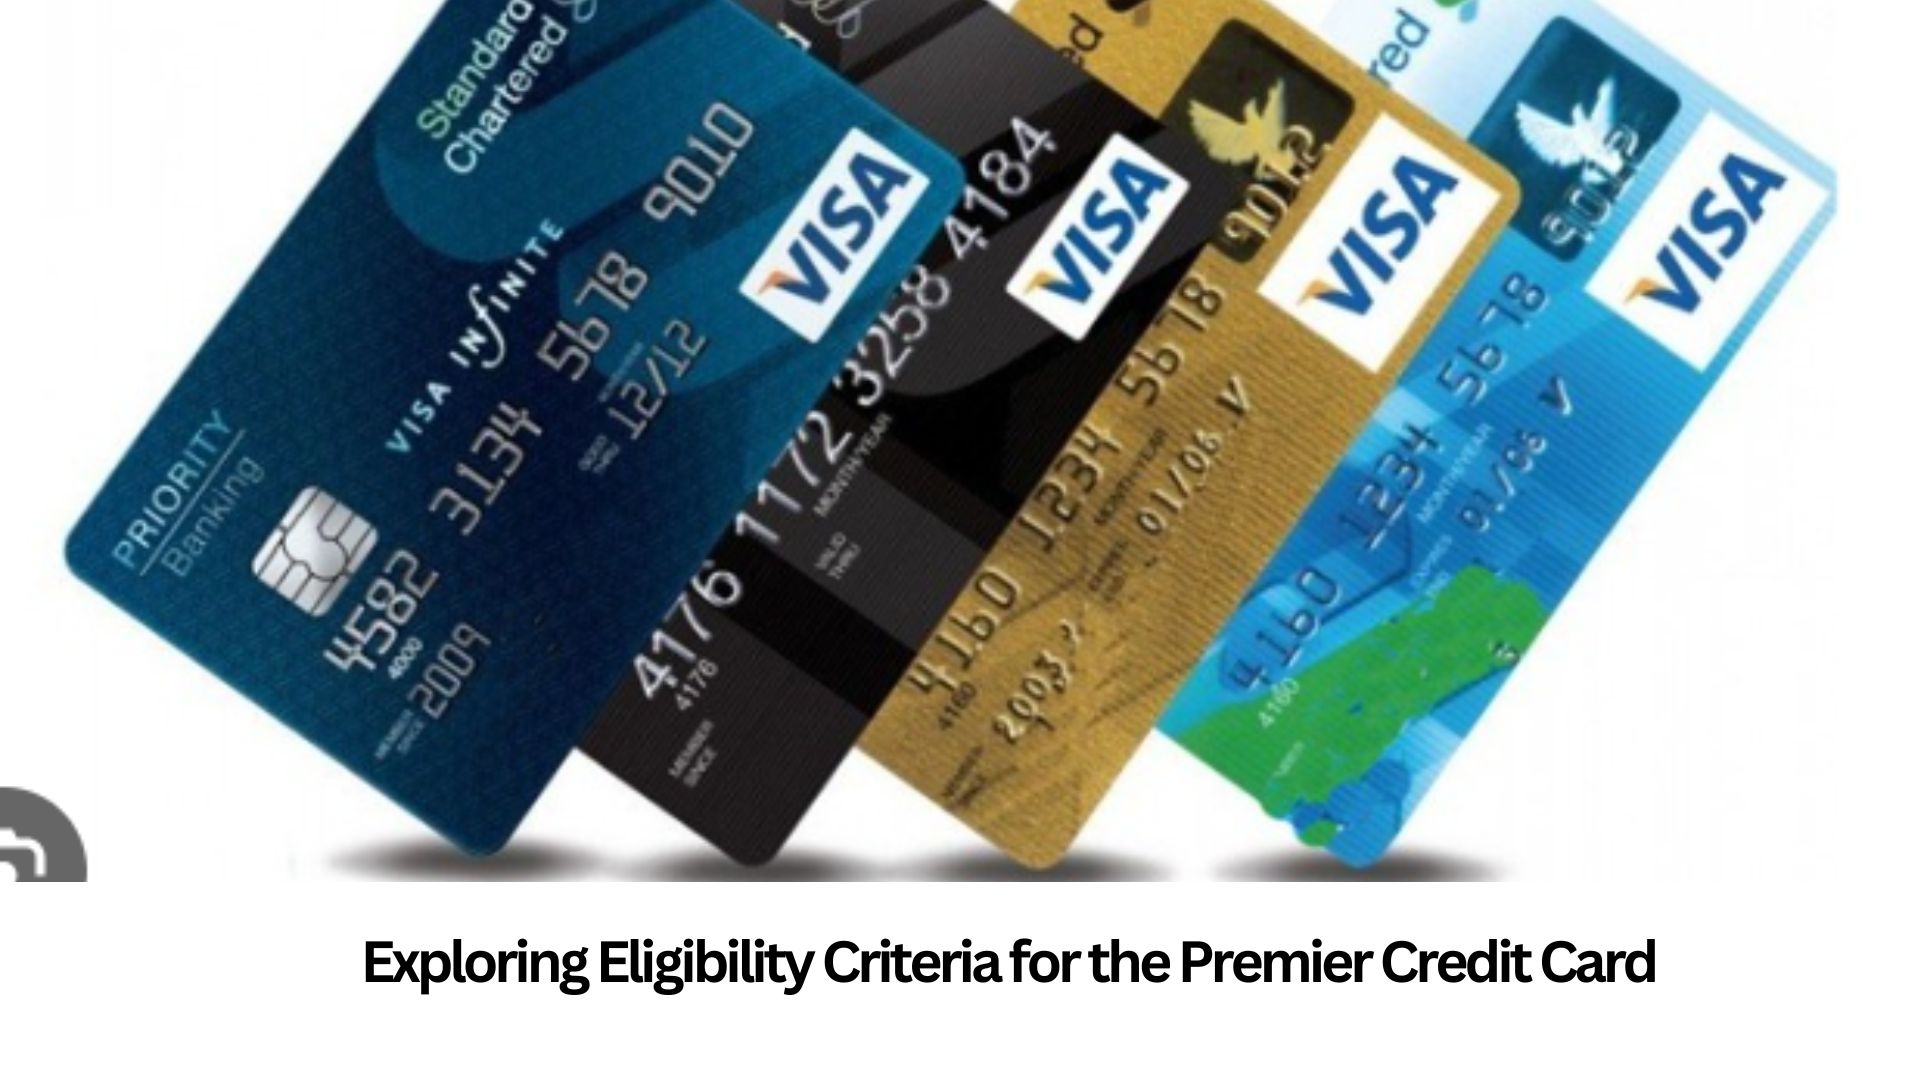 Standard Chartered Ultimate Credit Card: Check features, eligibility, and more